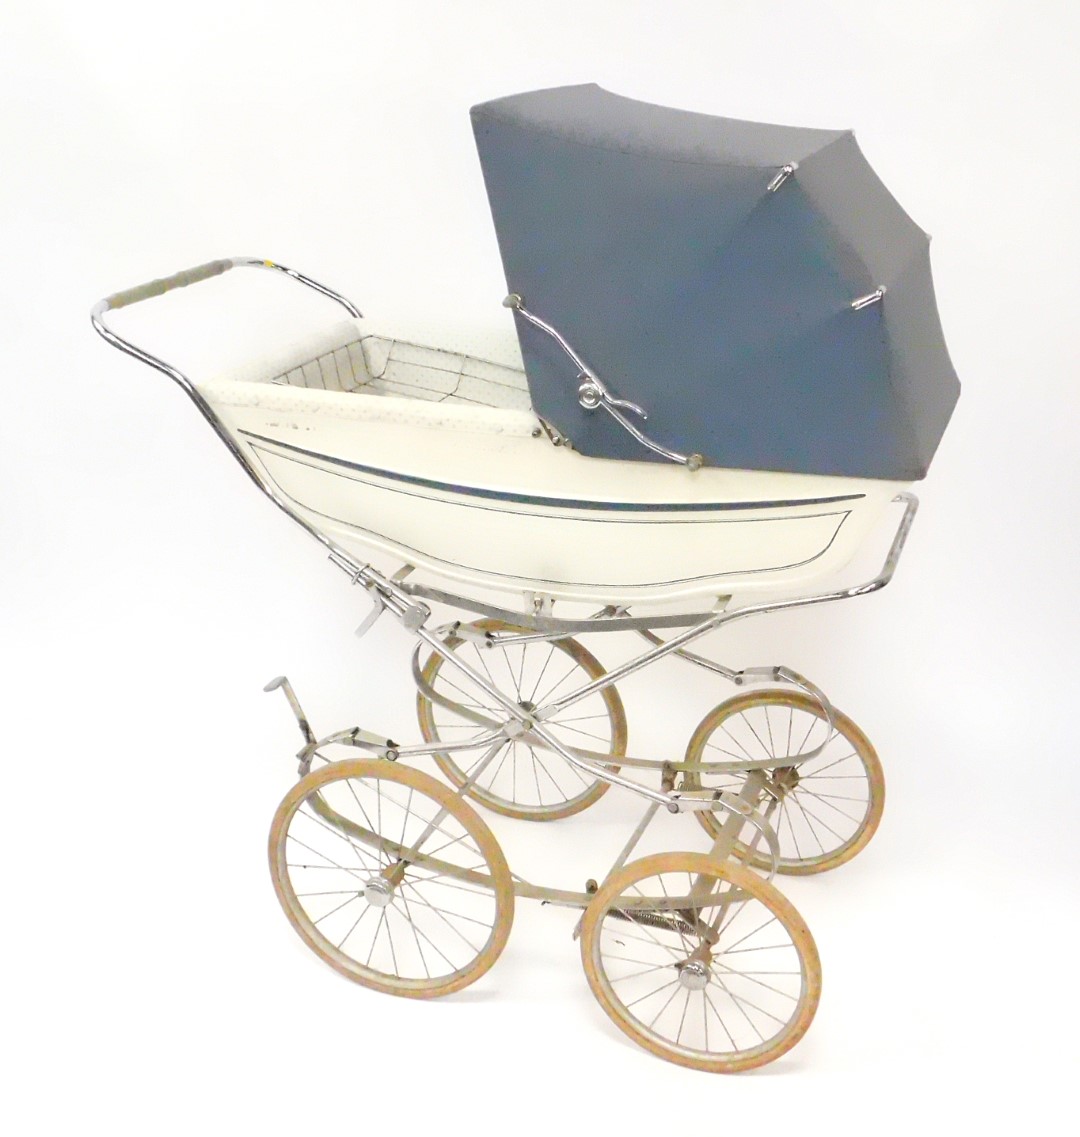 A Marmet coach built pram, with a blue trimmed white body, grey hood and blue floral interior